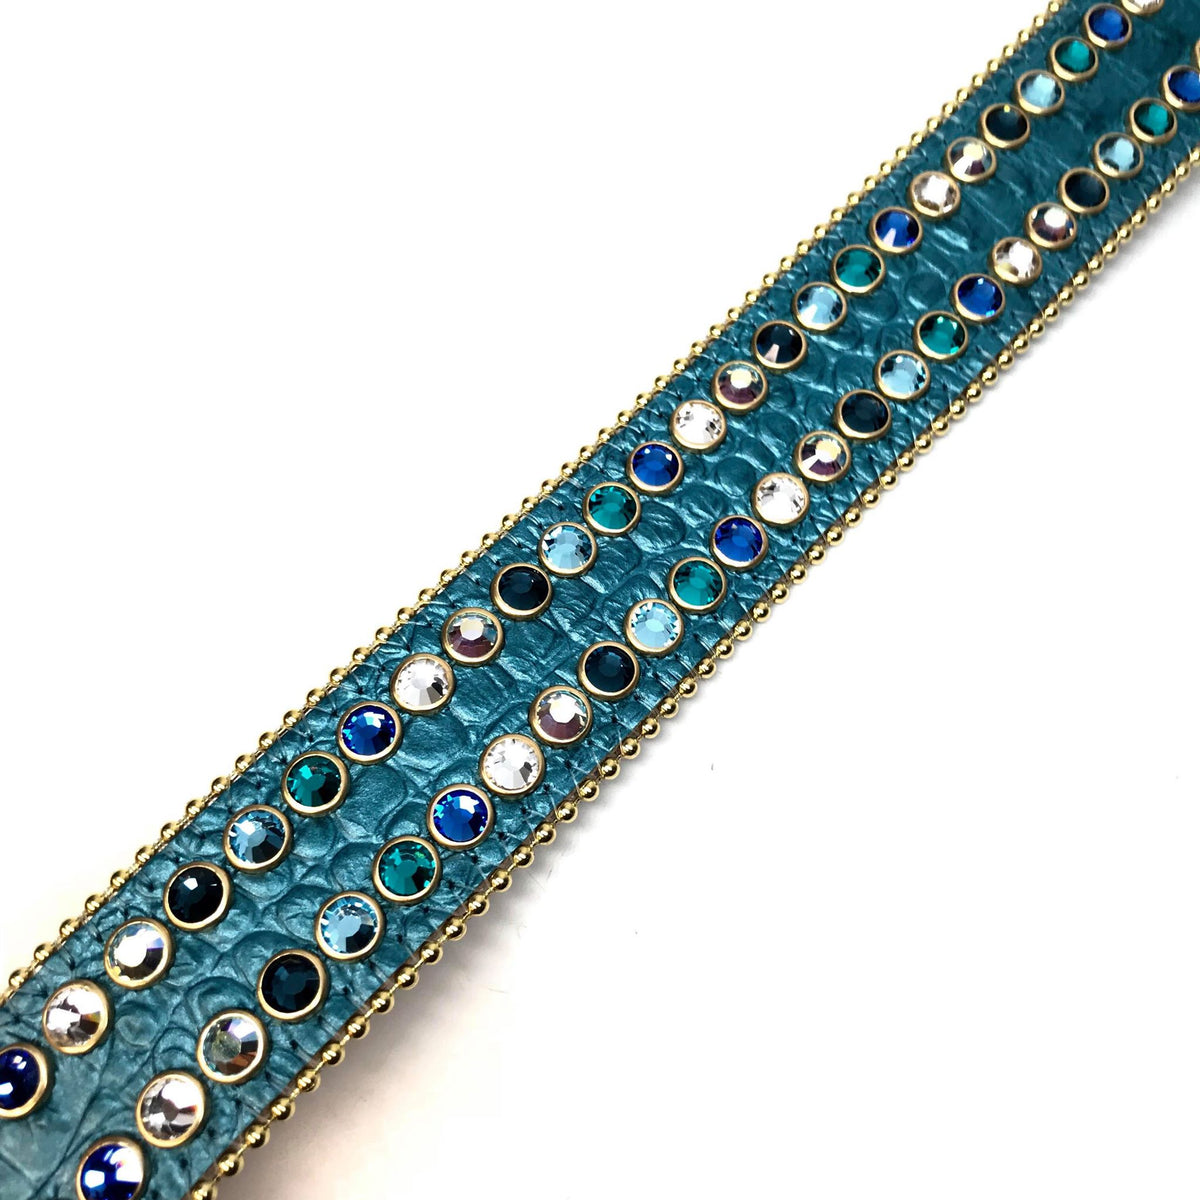 b.b. Simon Sea Gold Fully Loaded Crystal Belt - Dudes Boutique